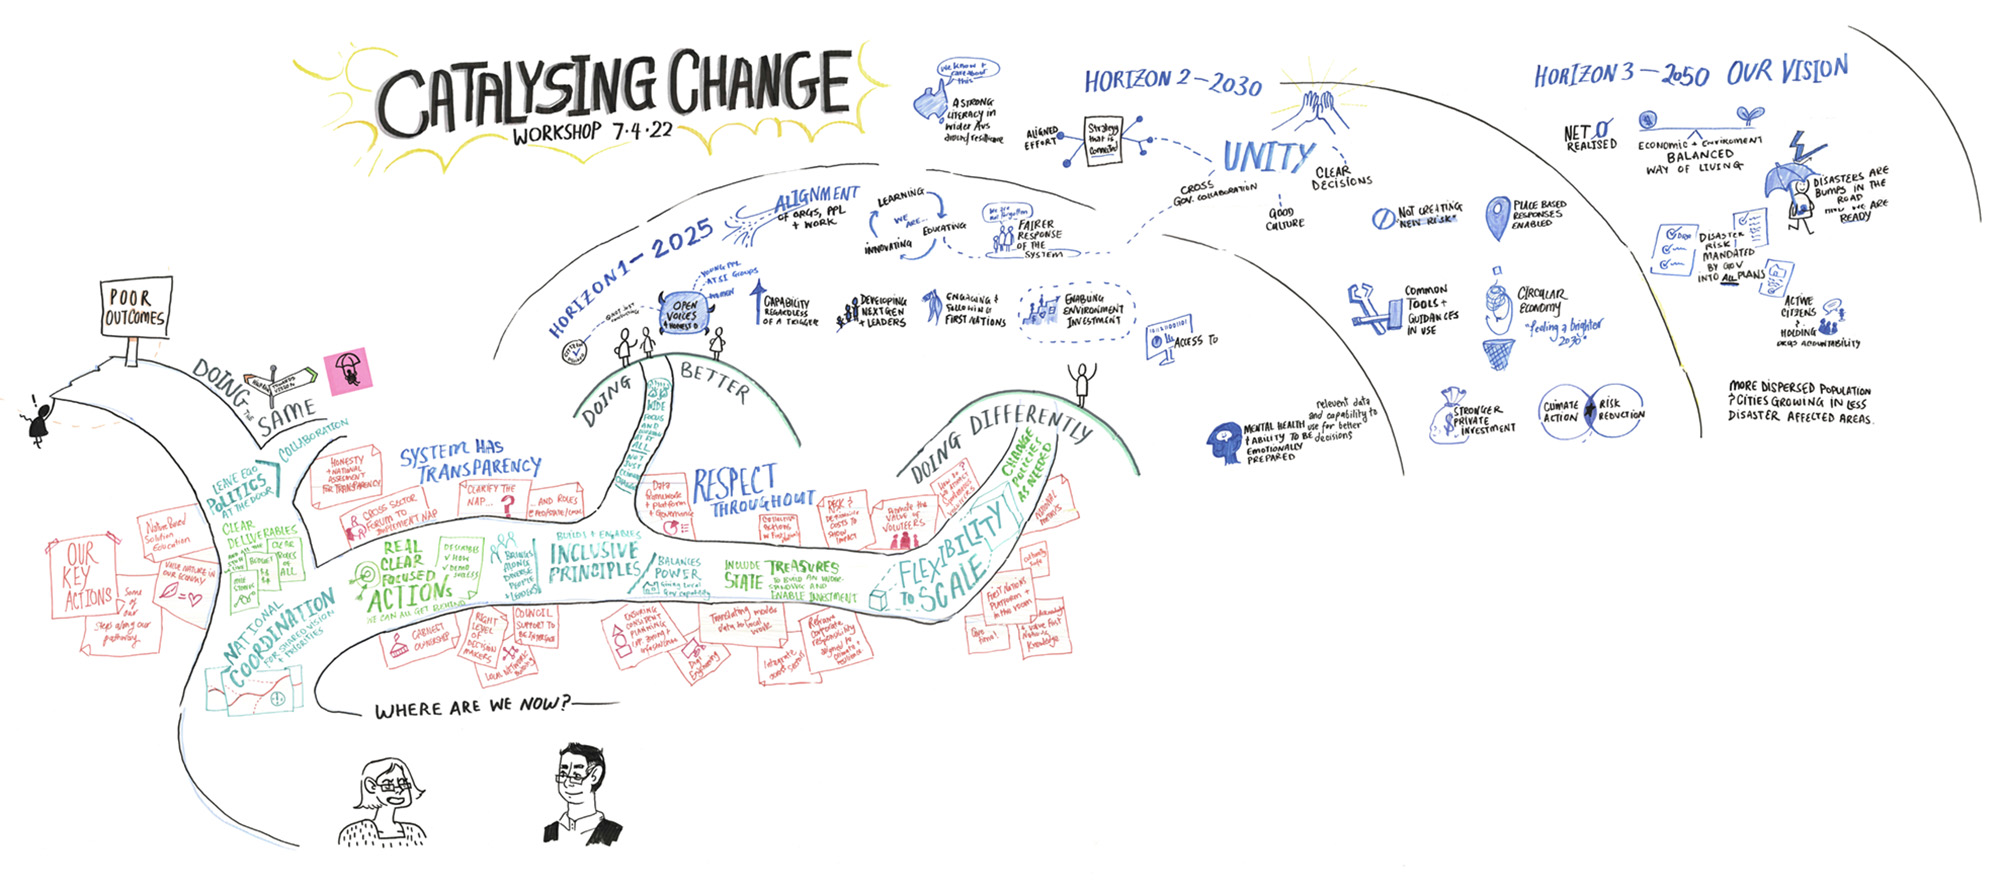 The graphic recording is a colourful illustration of the workshop's discussion. It features a pathway that leads to either poor outcomes or towards the three horizons; Horizon 1 - (2025) Alignment, Horizon 2 (2030) – Unity, Horizon 3 (2050) - Our realised vision. There are graphic images that represent the detail that describes what is happening at each horizon. The main headings are: we are 'Doing Better' & 'Doing Differently.' Along the pathway are the principles needed to enable the journey.